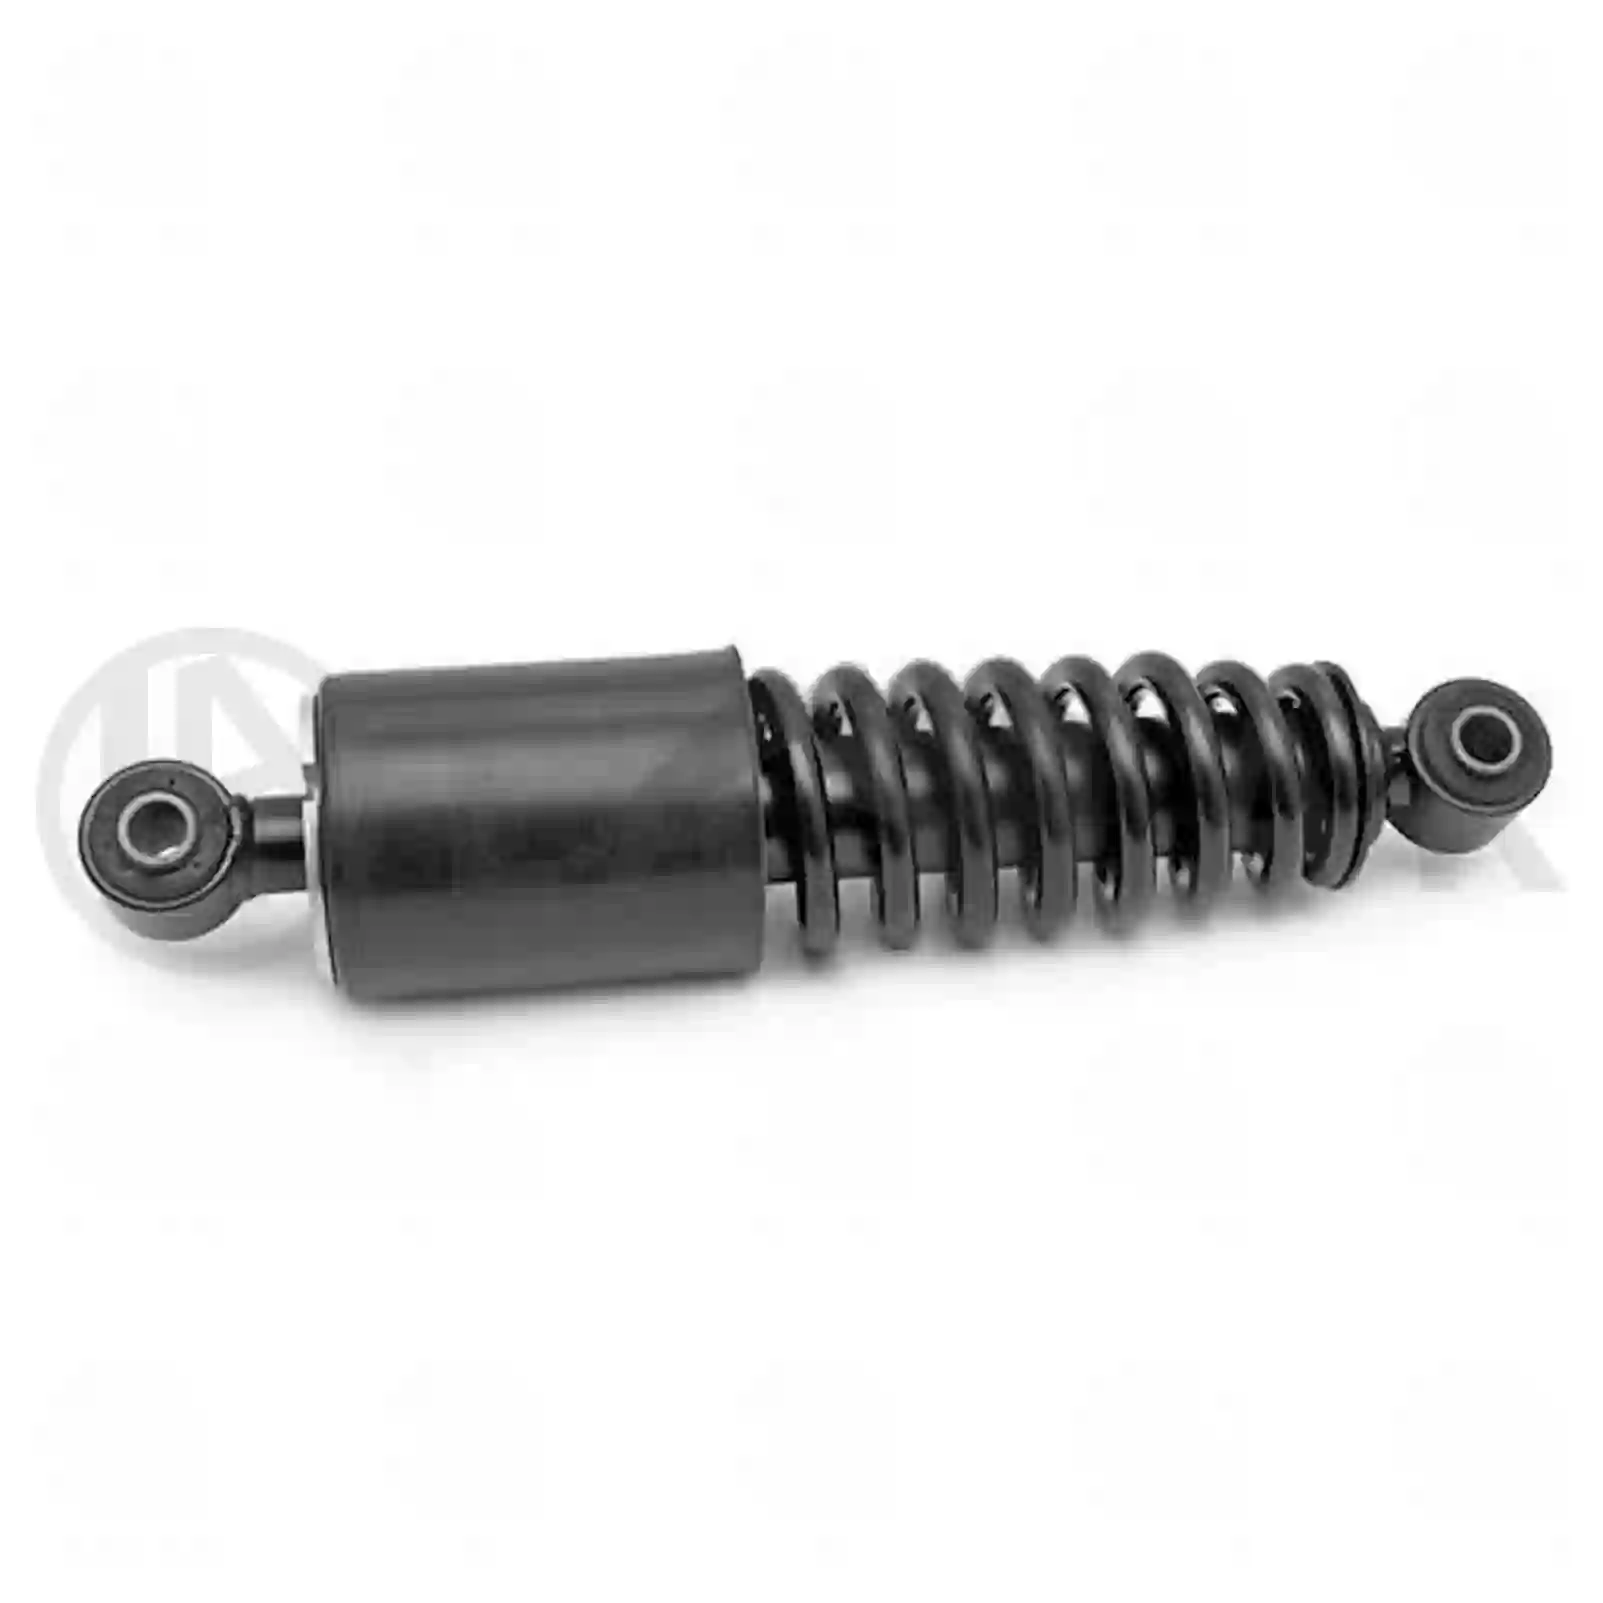 Cabin shock absorber, 77734872, 9408900519, 9408901019, , ||  77734872 Lastar Spare Part | Truck Spare Parts, Auotomotive Spare Parts Cabin shock absorber, 77734872, 9408900519, 9408901019, , ||  77734872 Lastar Spare Part | Truck Spare Parts, Auotomotive Spare Parts